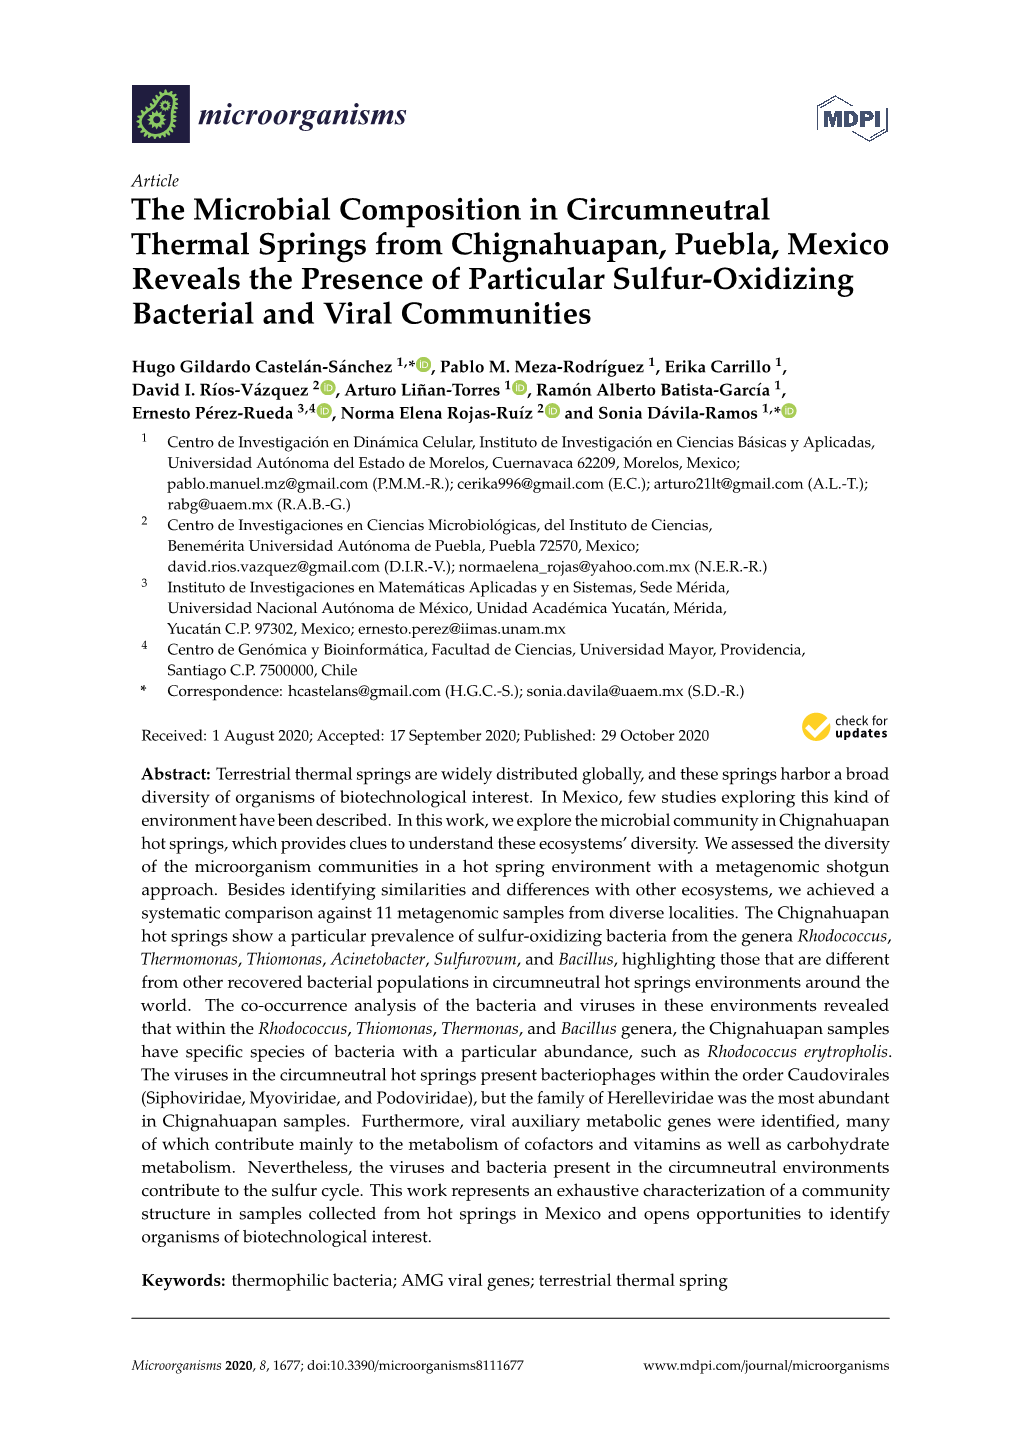 The Microbial Composition in Circumneutral Thermal Springs